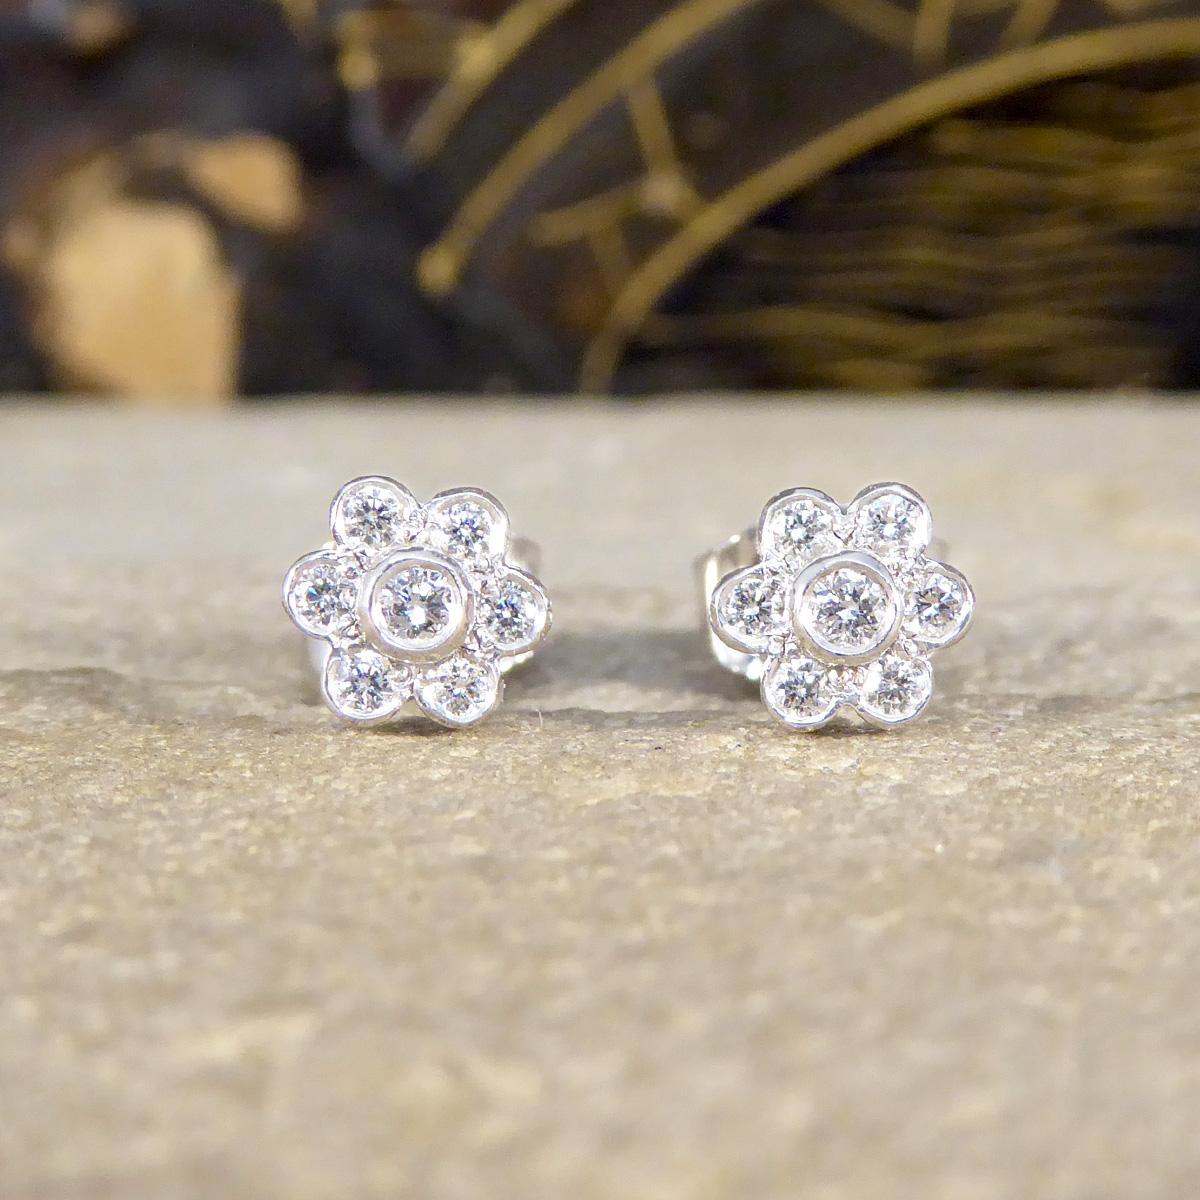 These Diamond flower cluster stud earrings in 18ct White Gold are a dazzling embodiment of elegance and sophistication. Crafted with precision, each earring features a stunning cluster of 6 brilliant-cut diamonds around one centre brilliant cut